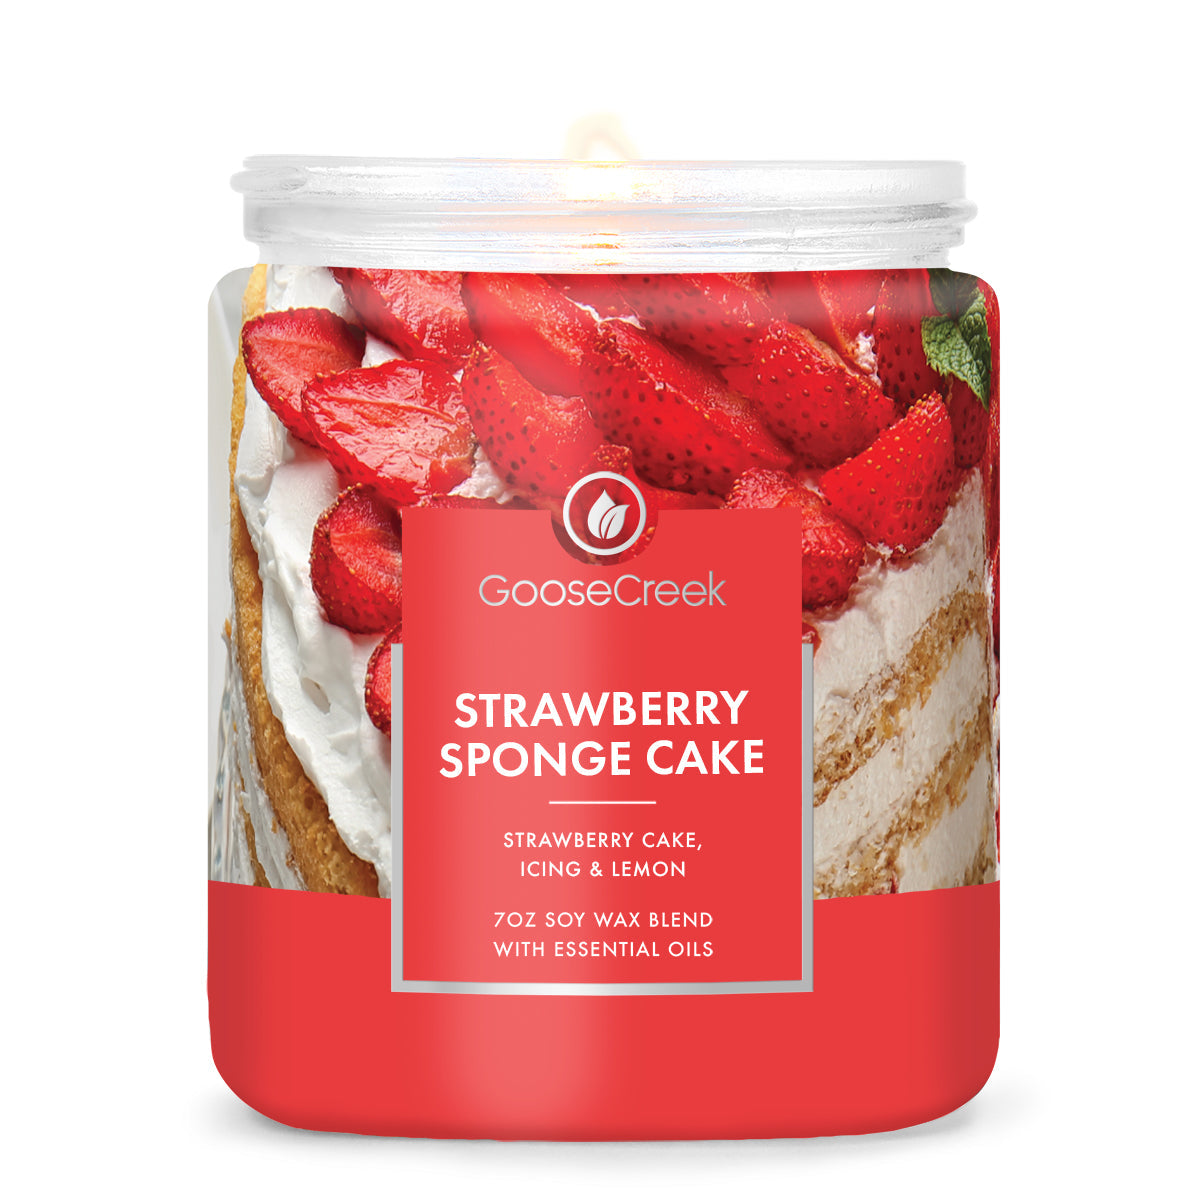 Heaven Scent Candles Strawberry Shortcake